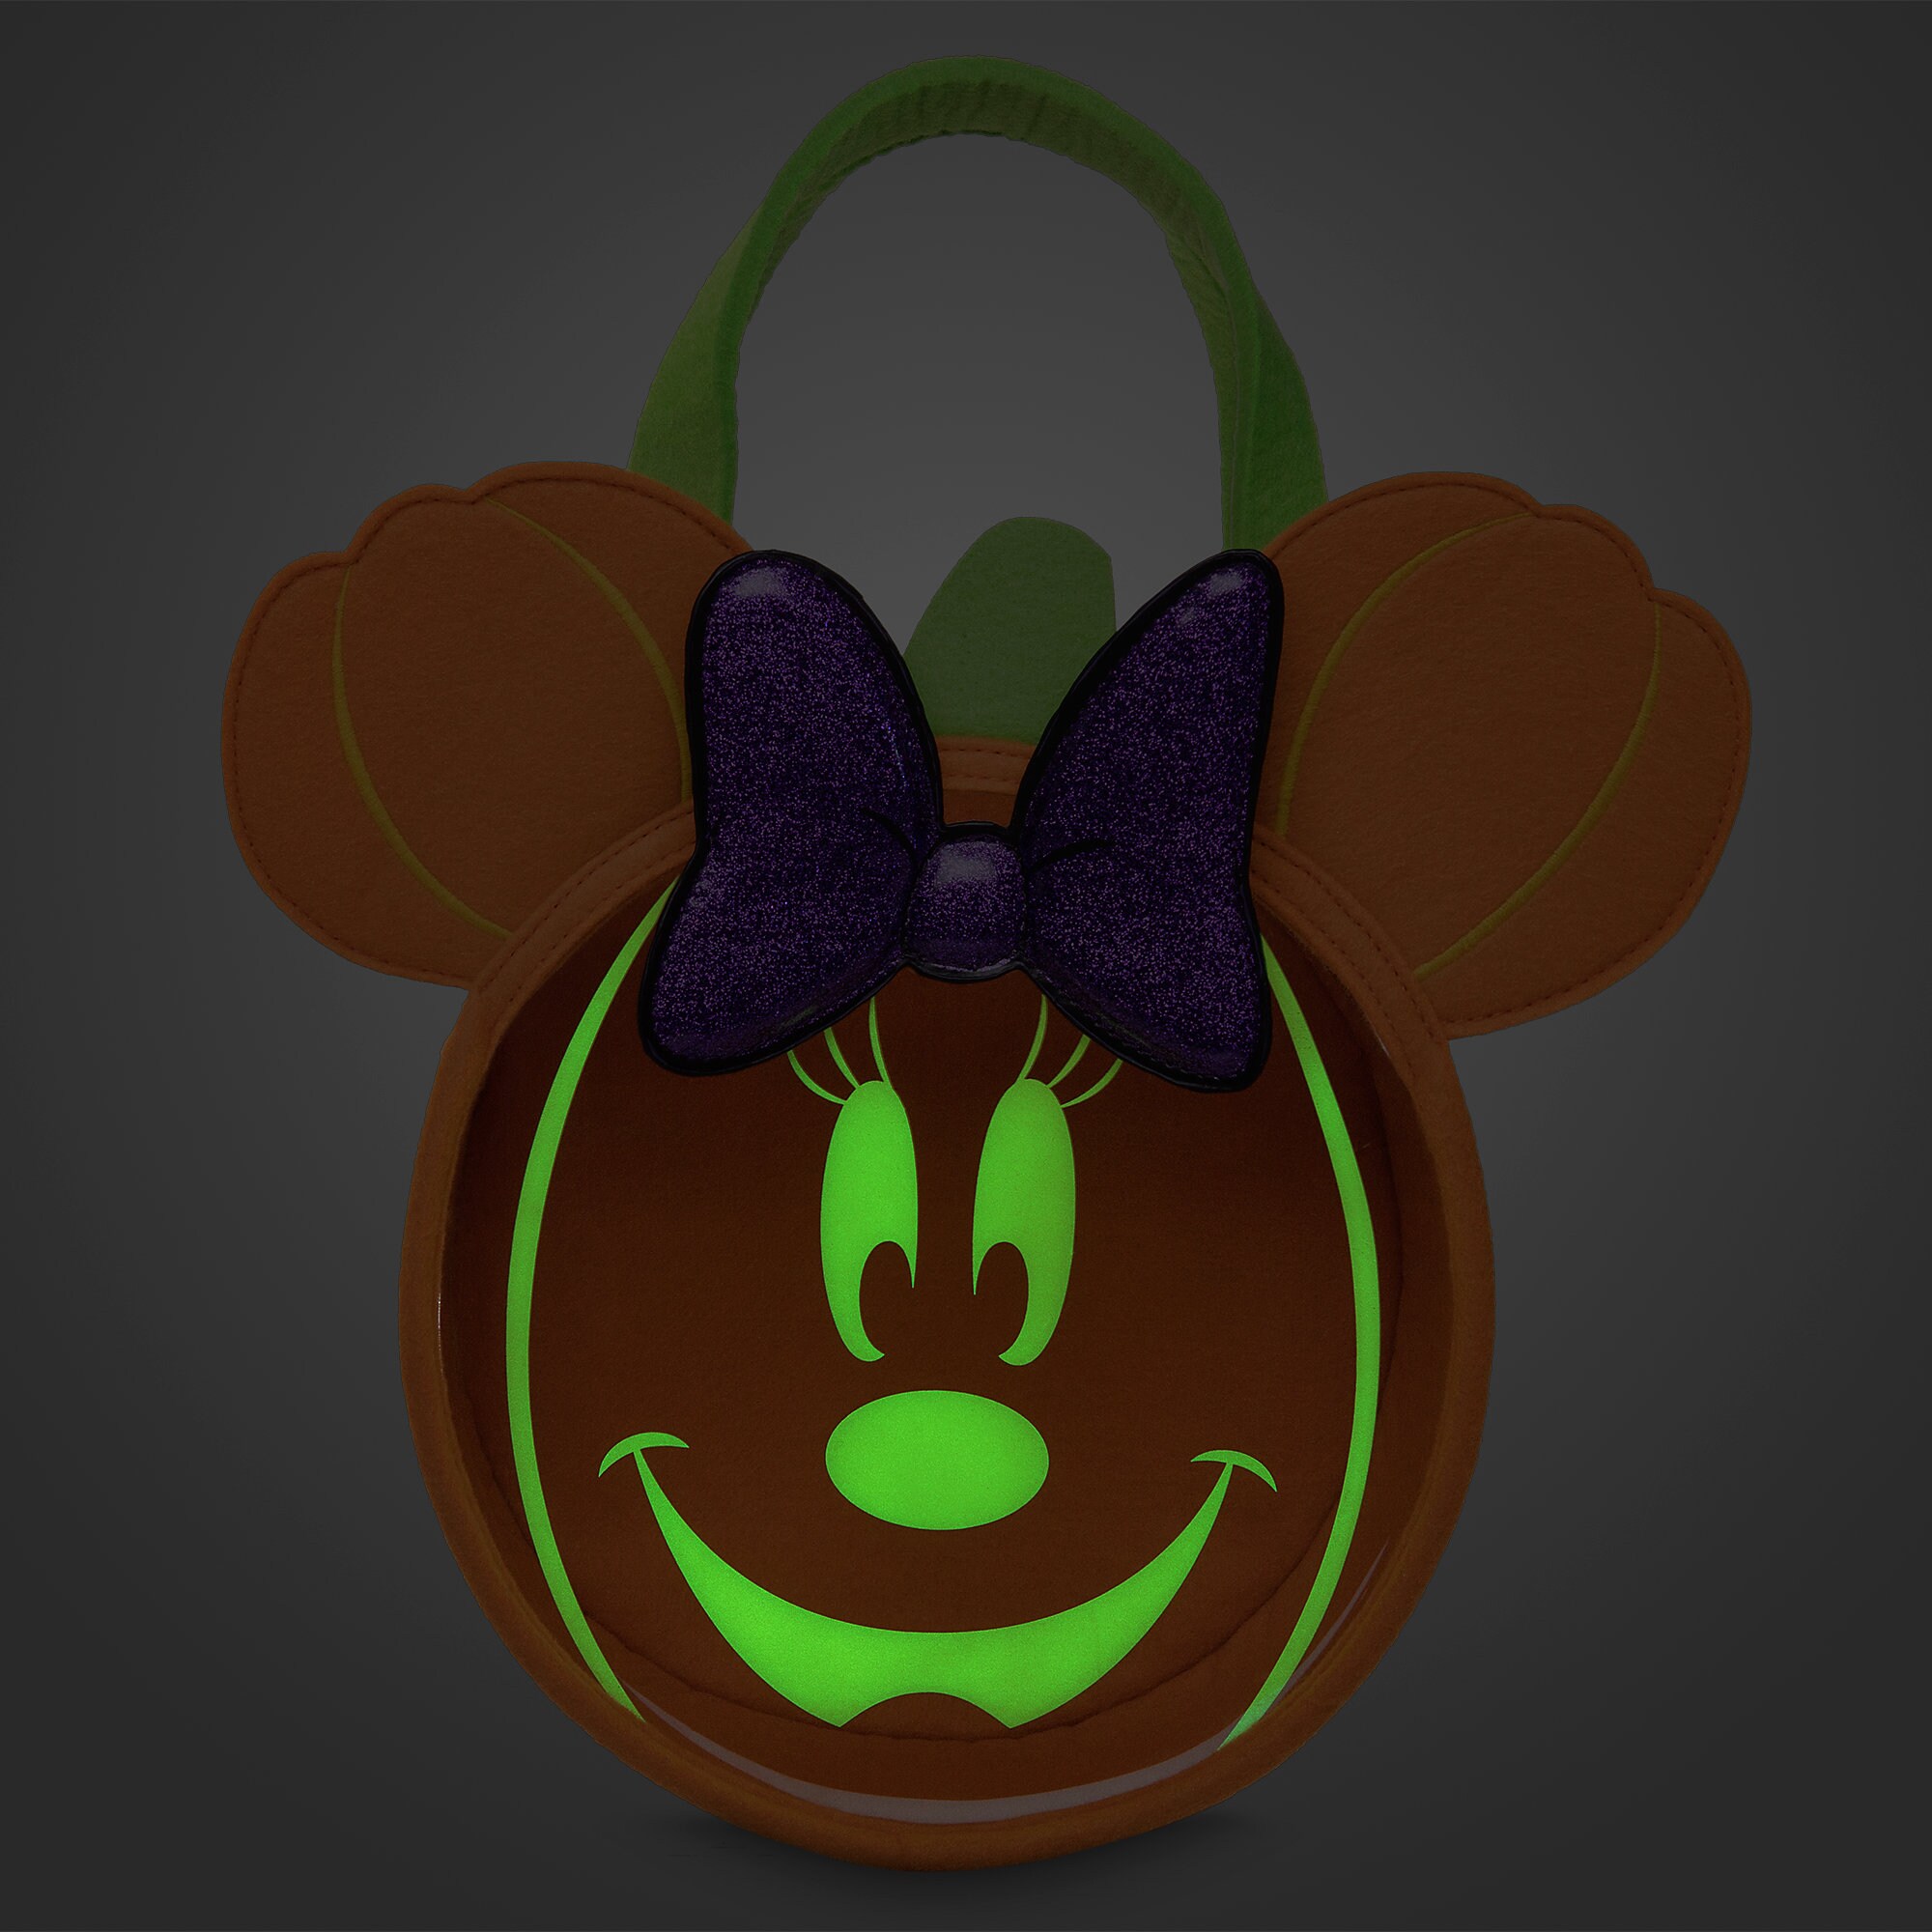 Minnie Mouse Trick or Treat Bag